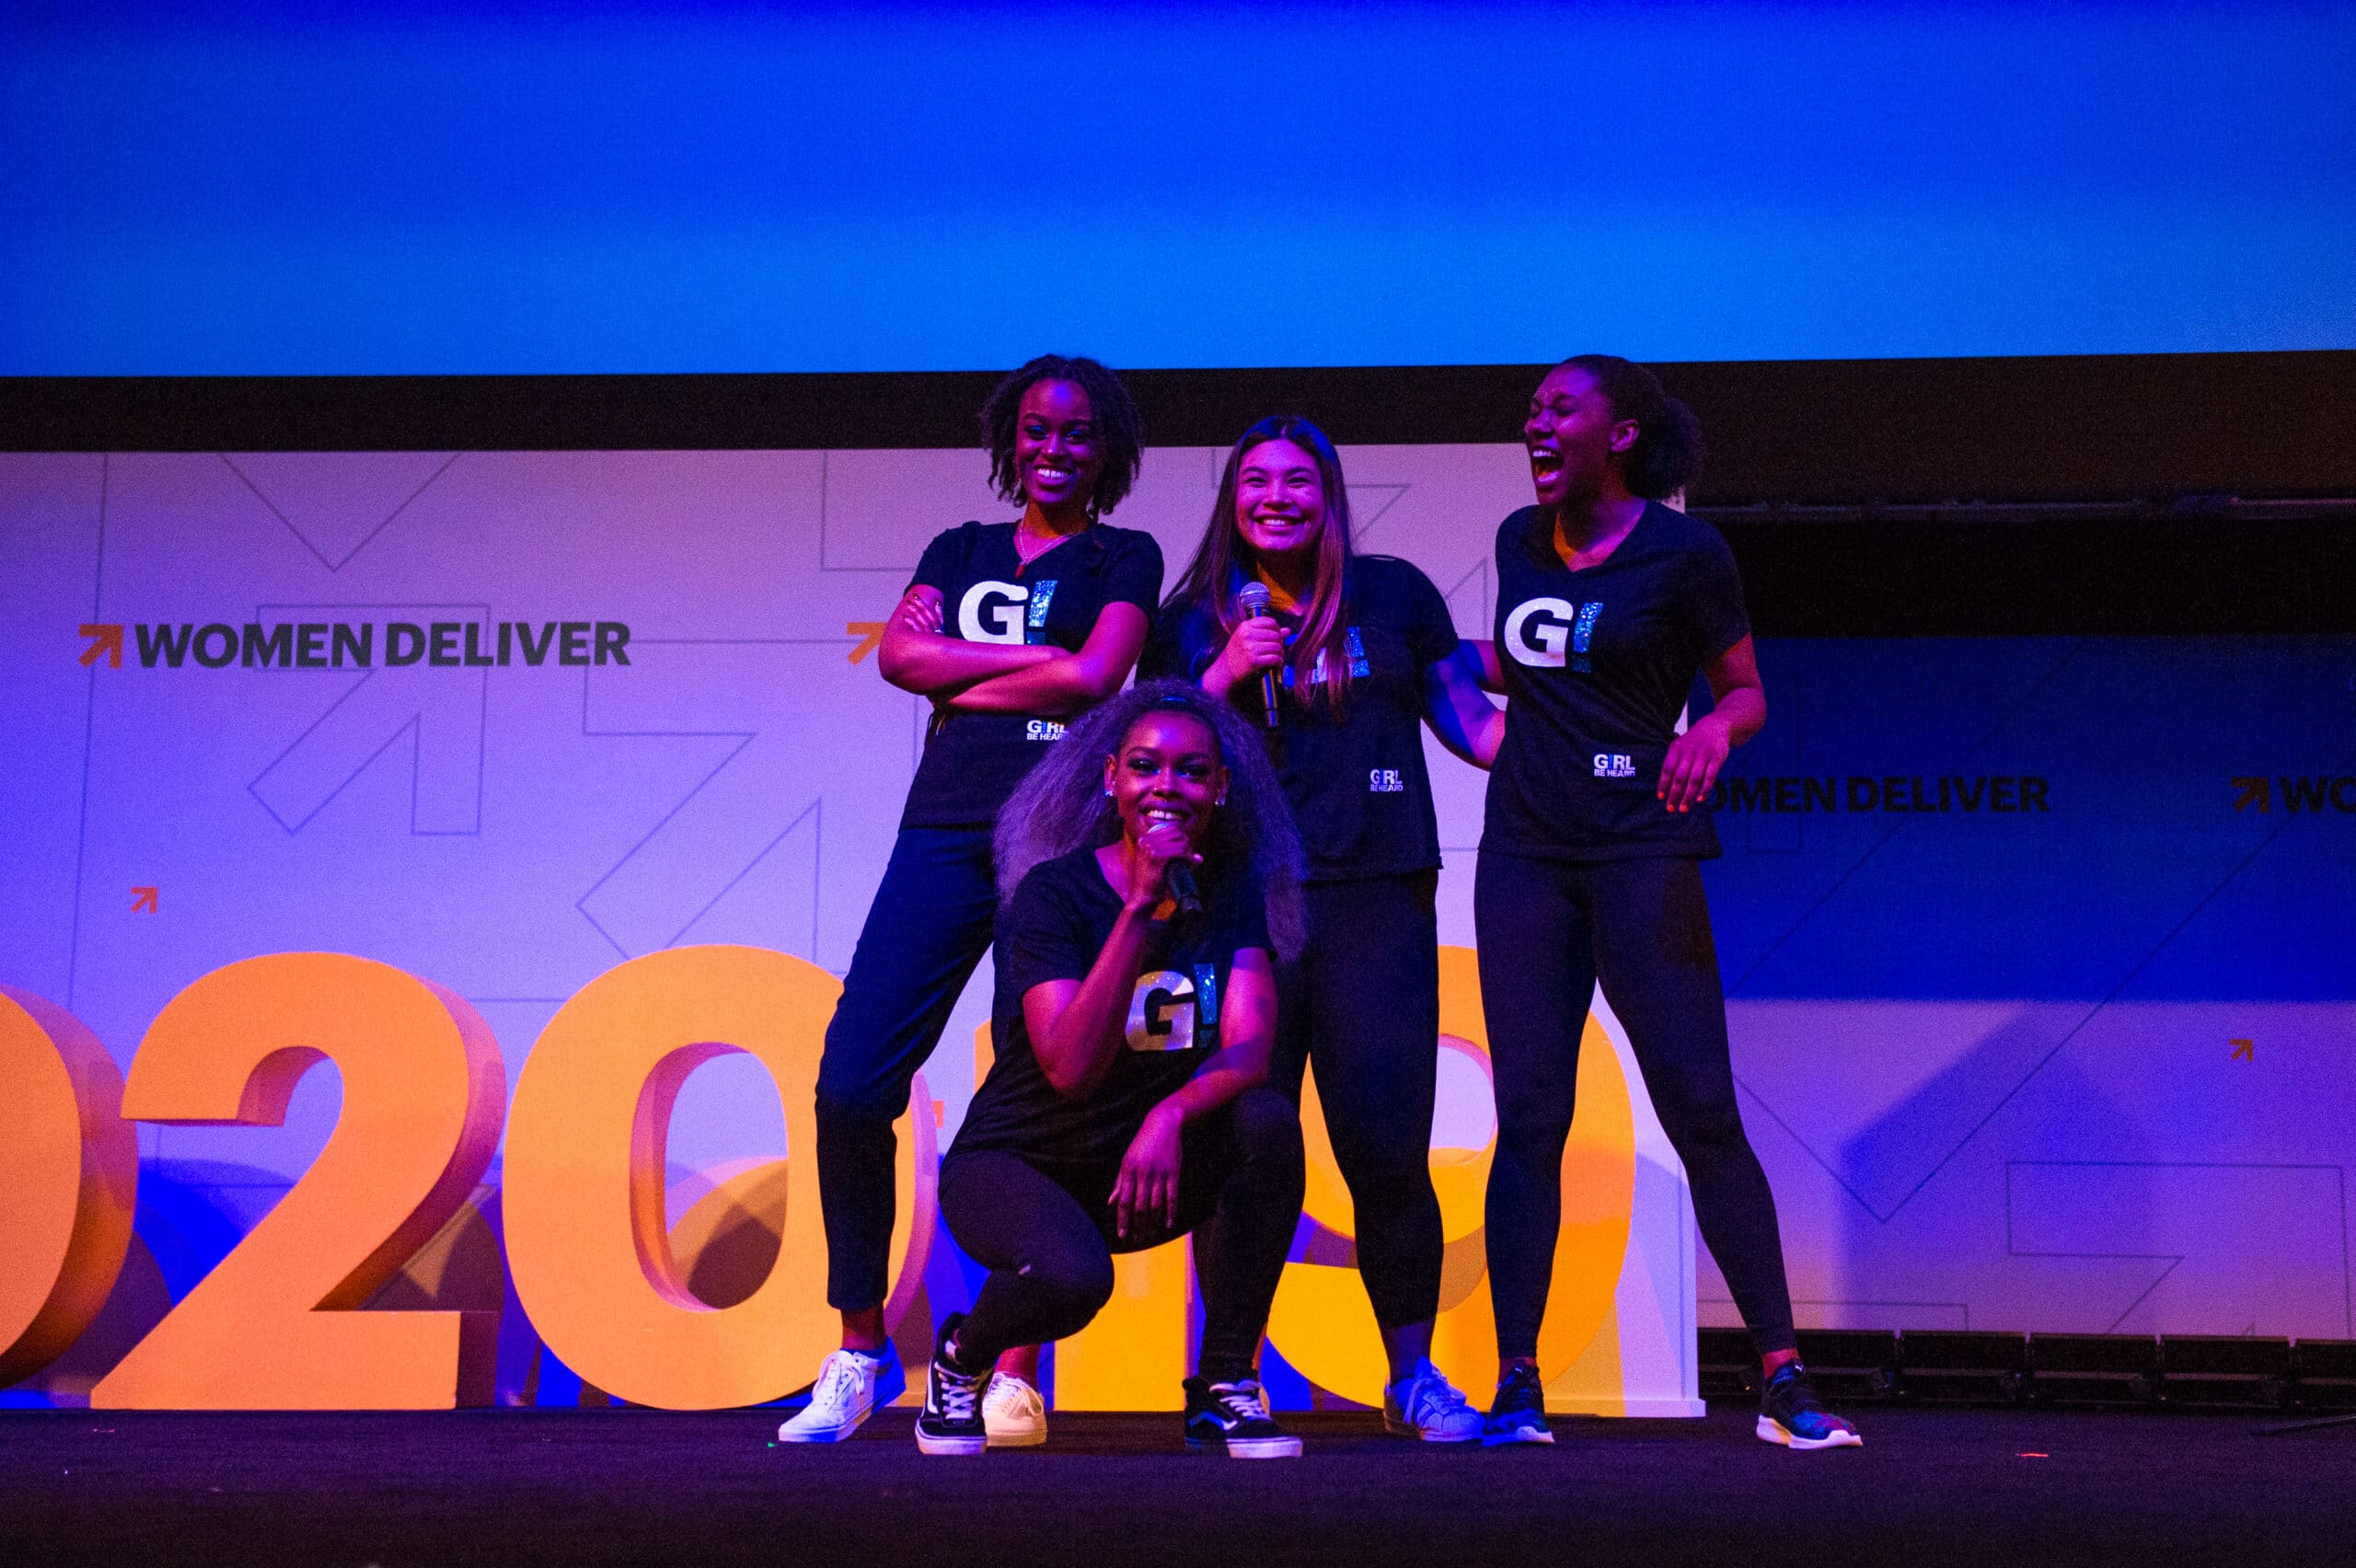 Girl Be Heard's company members Chelsea Allison, Halle Parades, Purrsian White, and Camryn Bruno perform at the 2019 Women Deliver Conference in Canada.